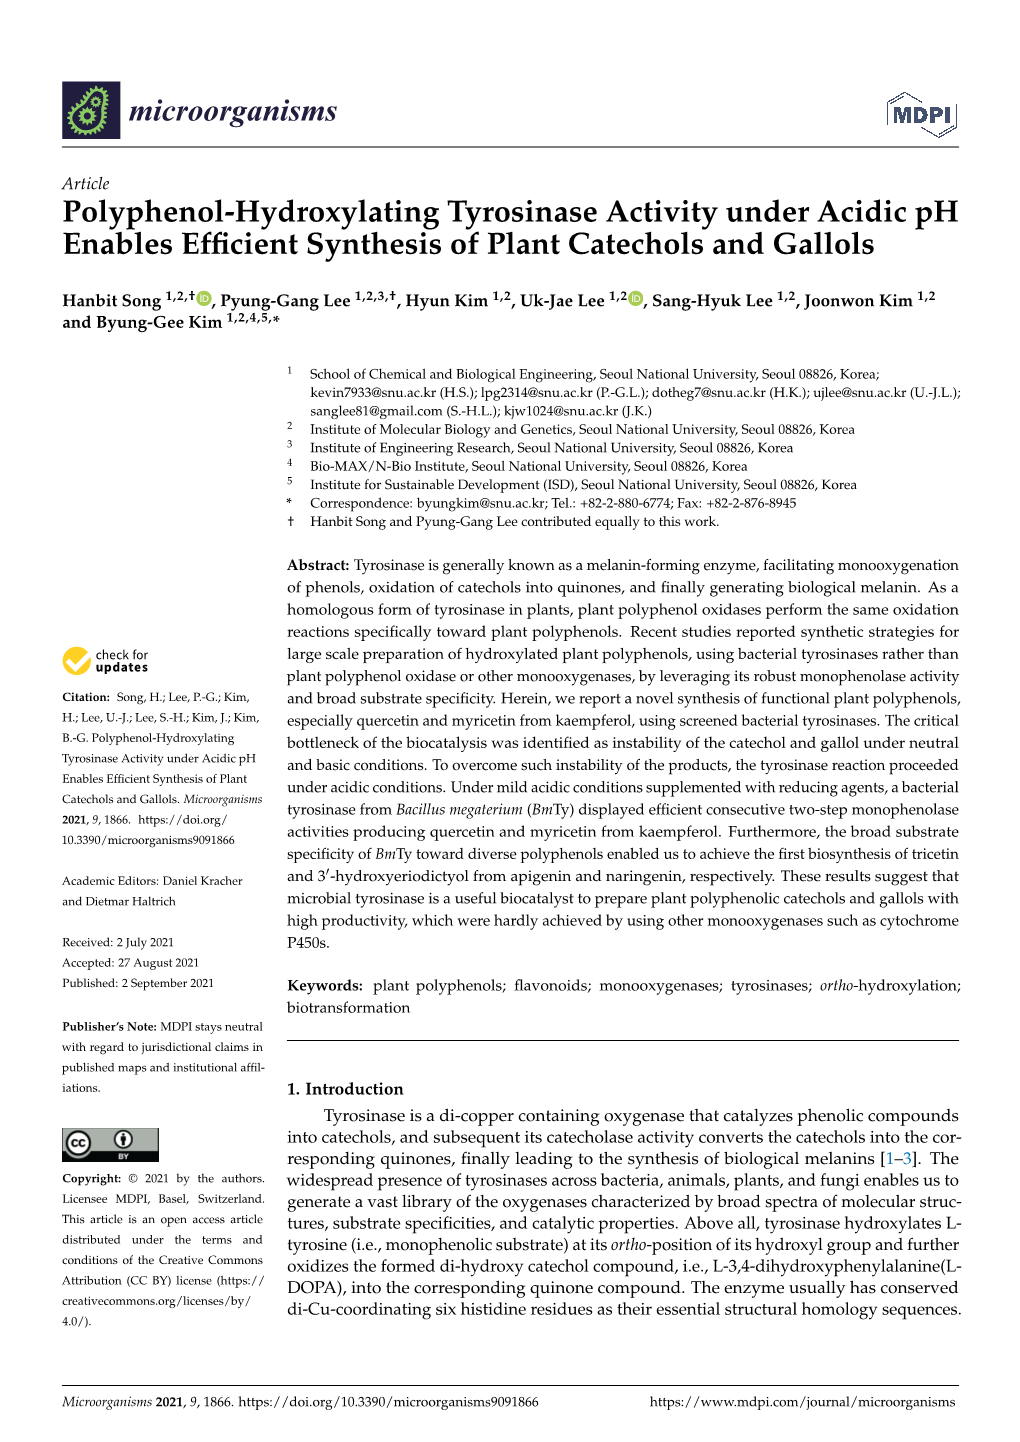 Polyphenol-Hydroxylating Tyrosinase Activity Under Acidic Ph Enables Efﬁcient Synthesis of Plant Catechols and Gallols